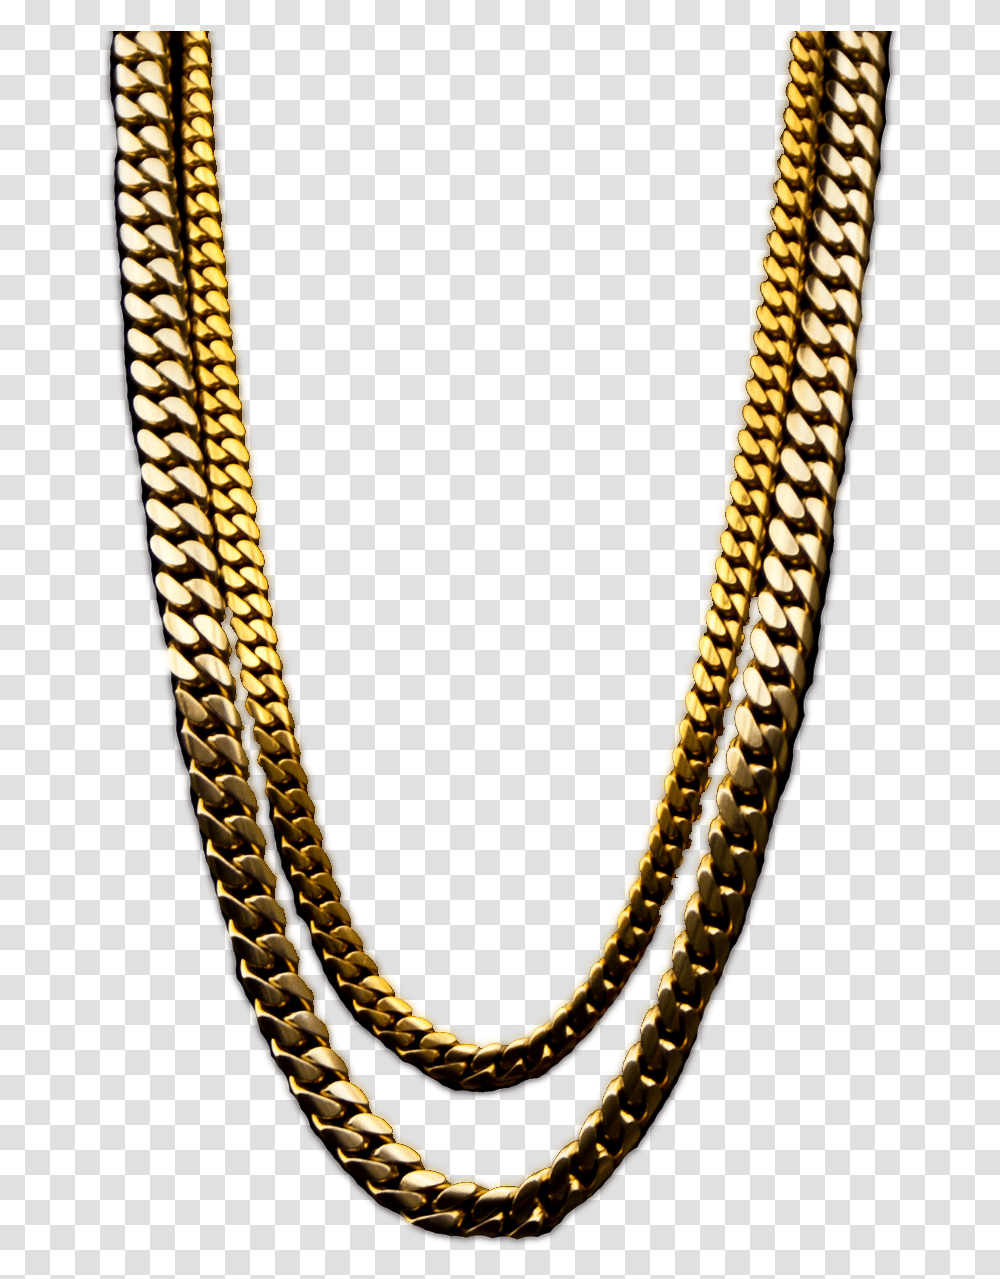 Gold Chain 42718 Free Icons And 2 Chainz Based On A Tru Story Cover, Snake, Reptile, Animal, Necklace Transparent Png